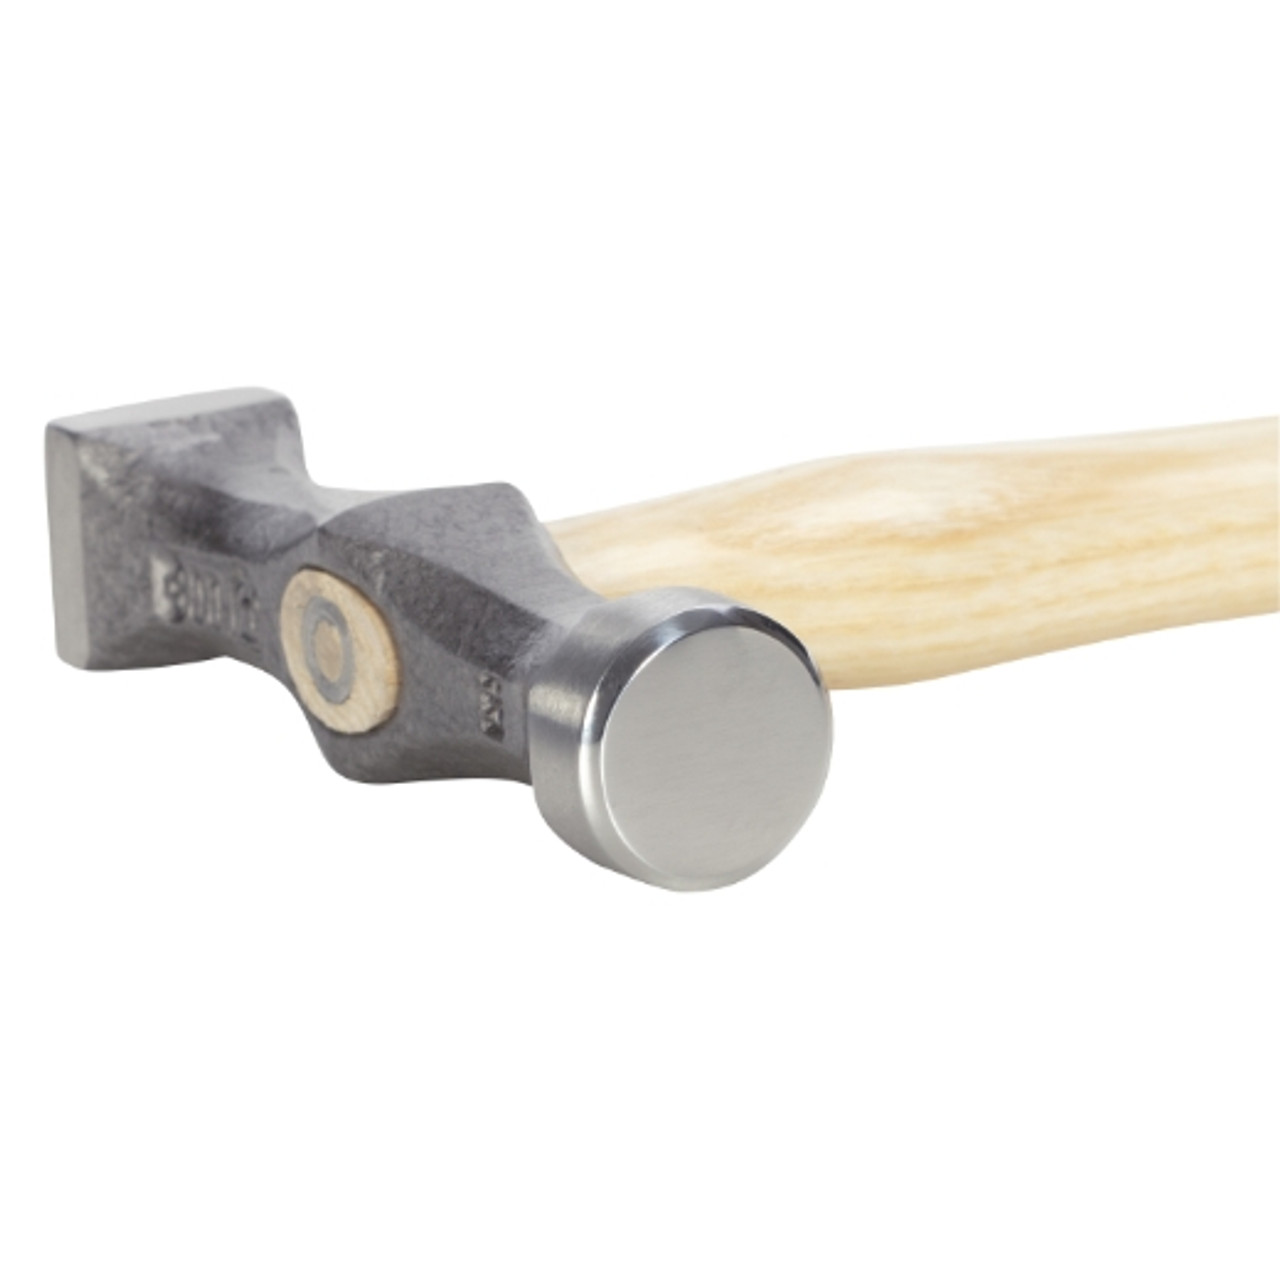 Picard 300gm Planishing Hammer, 25mm round flat and 22mm square faces